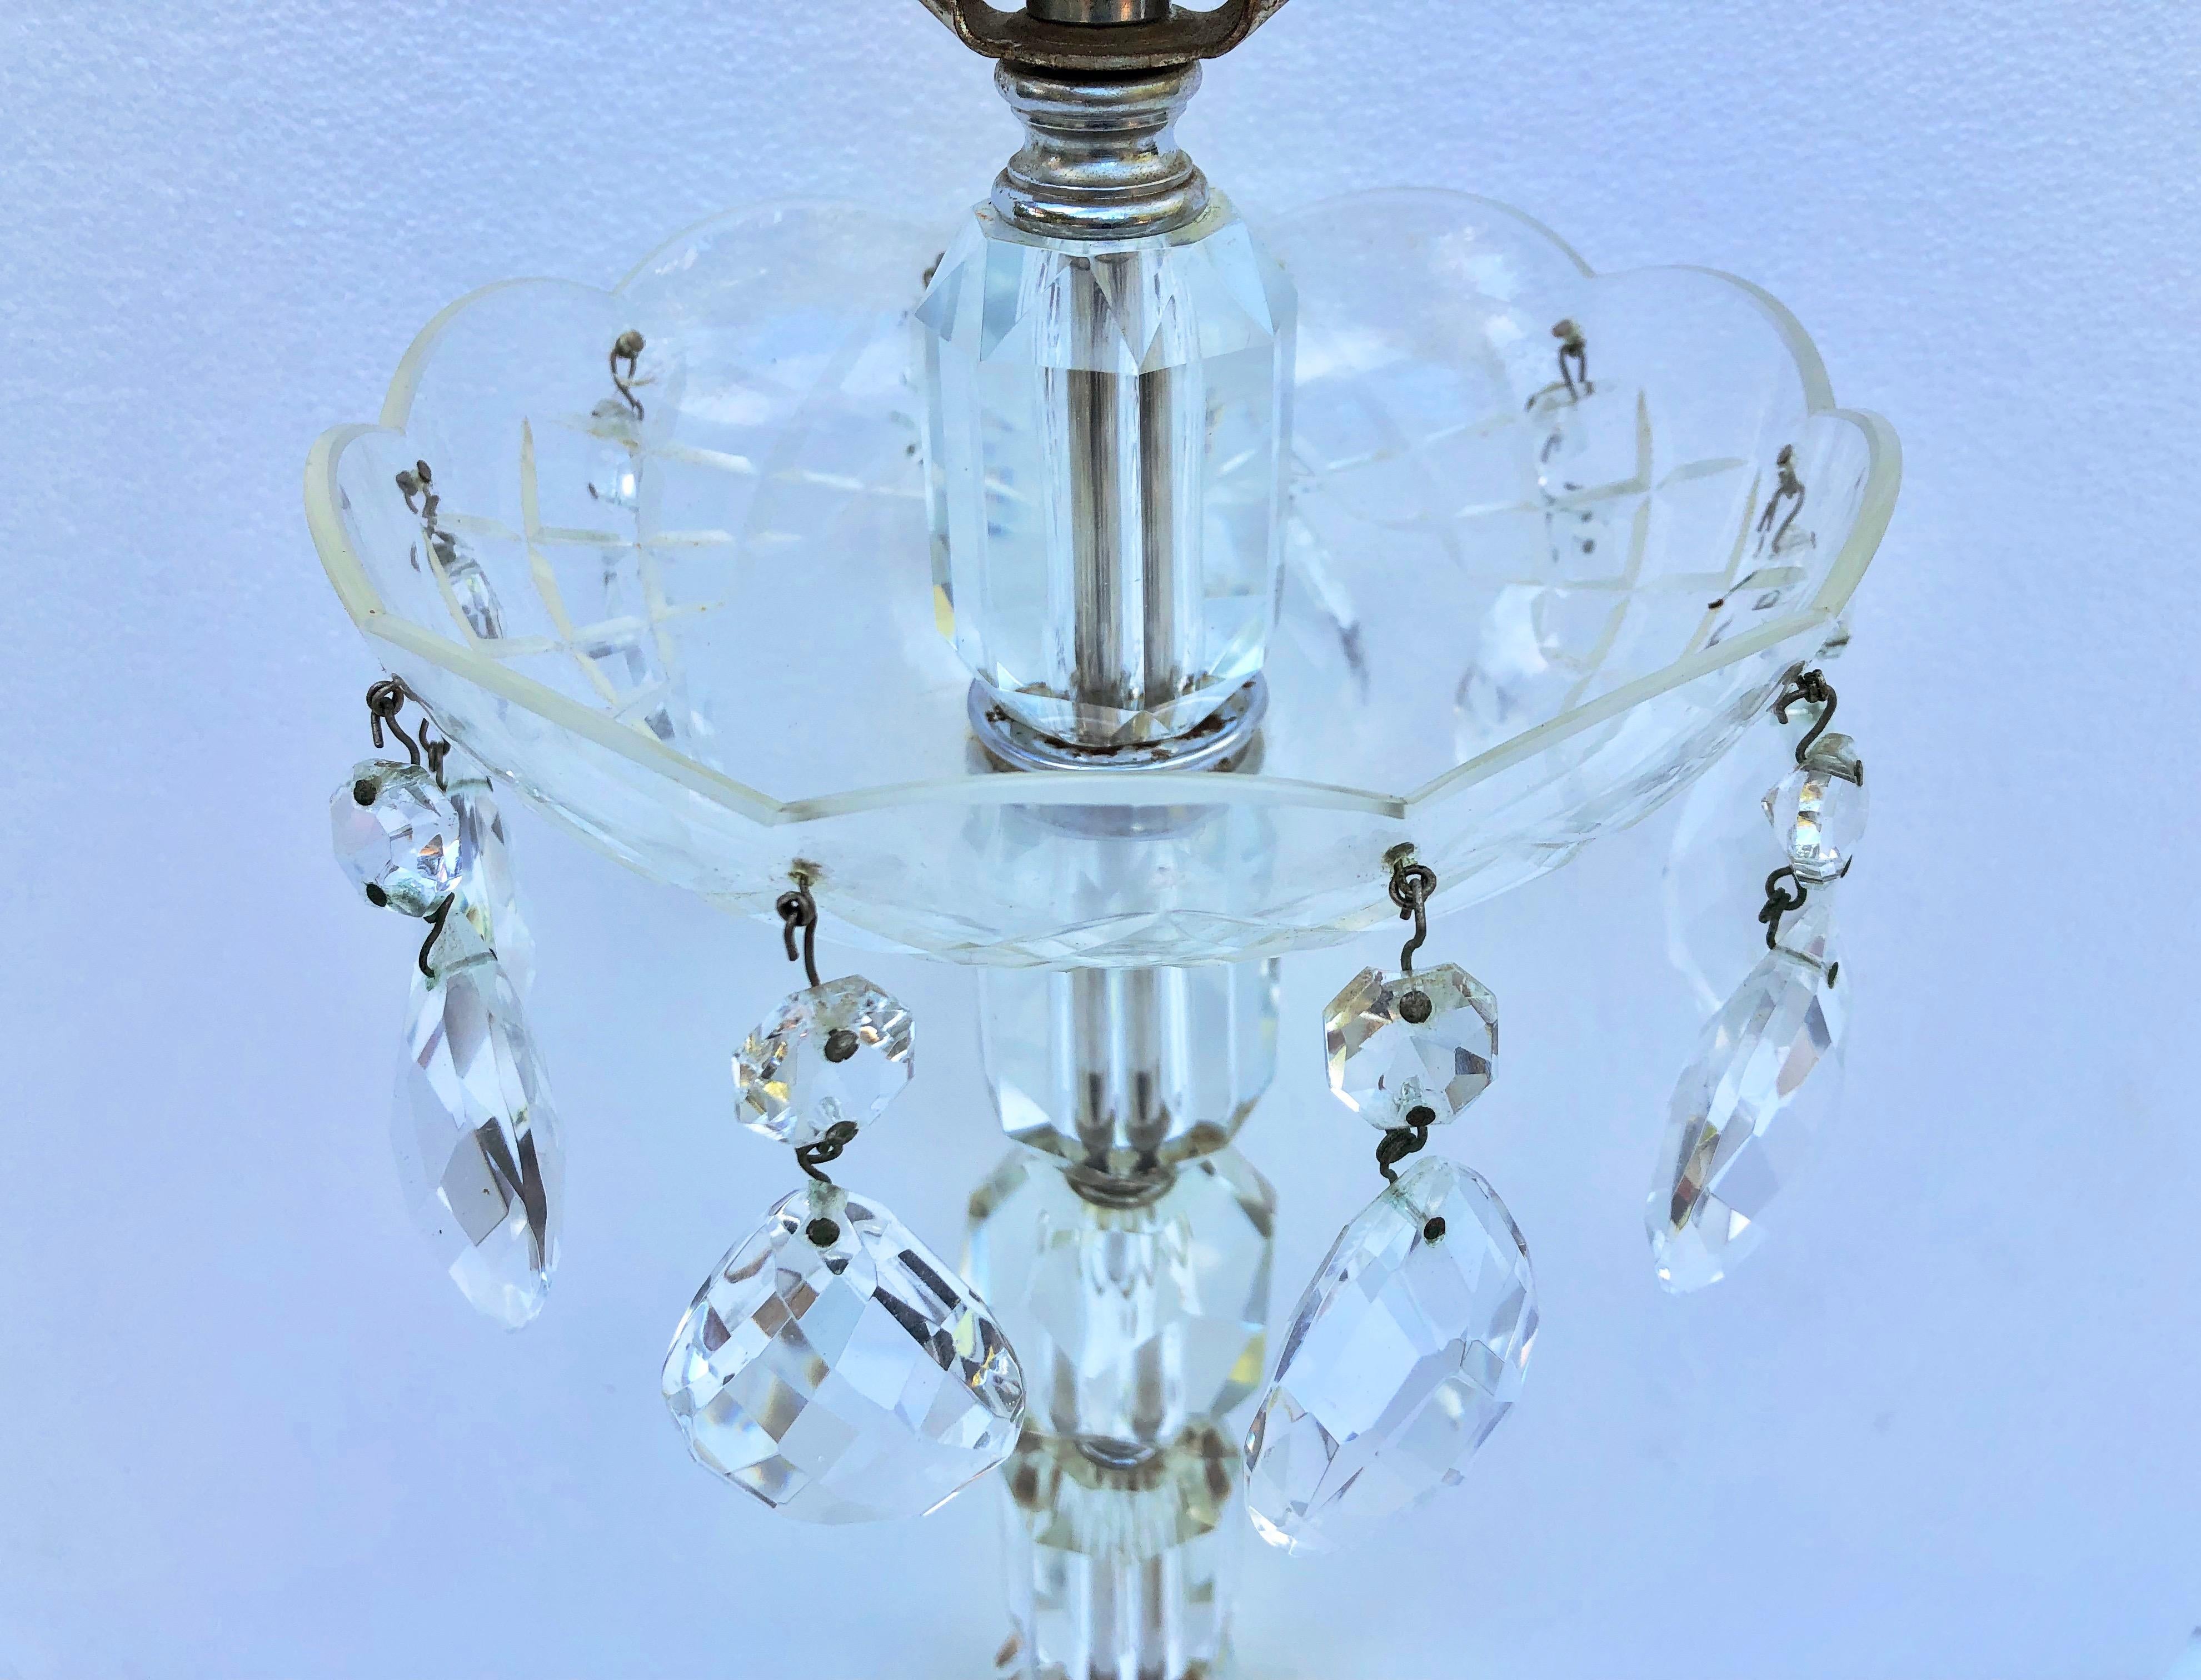 antique lamp with hanging crystals